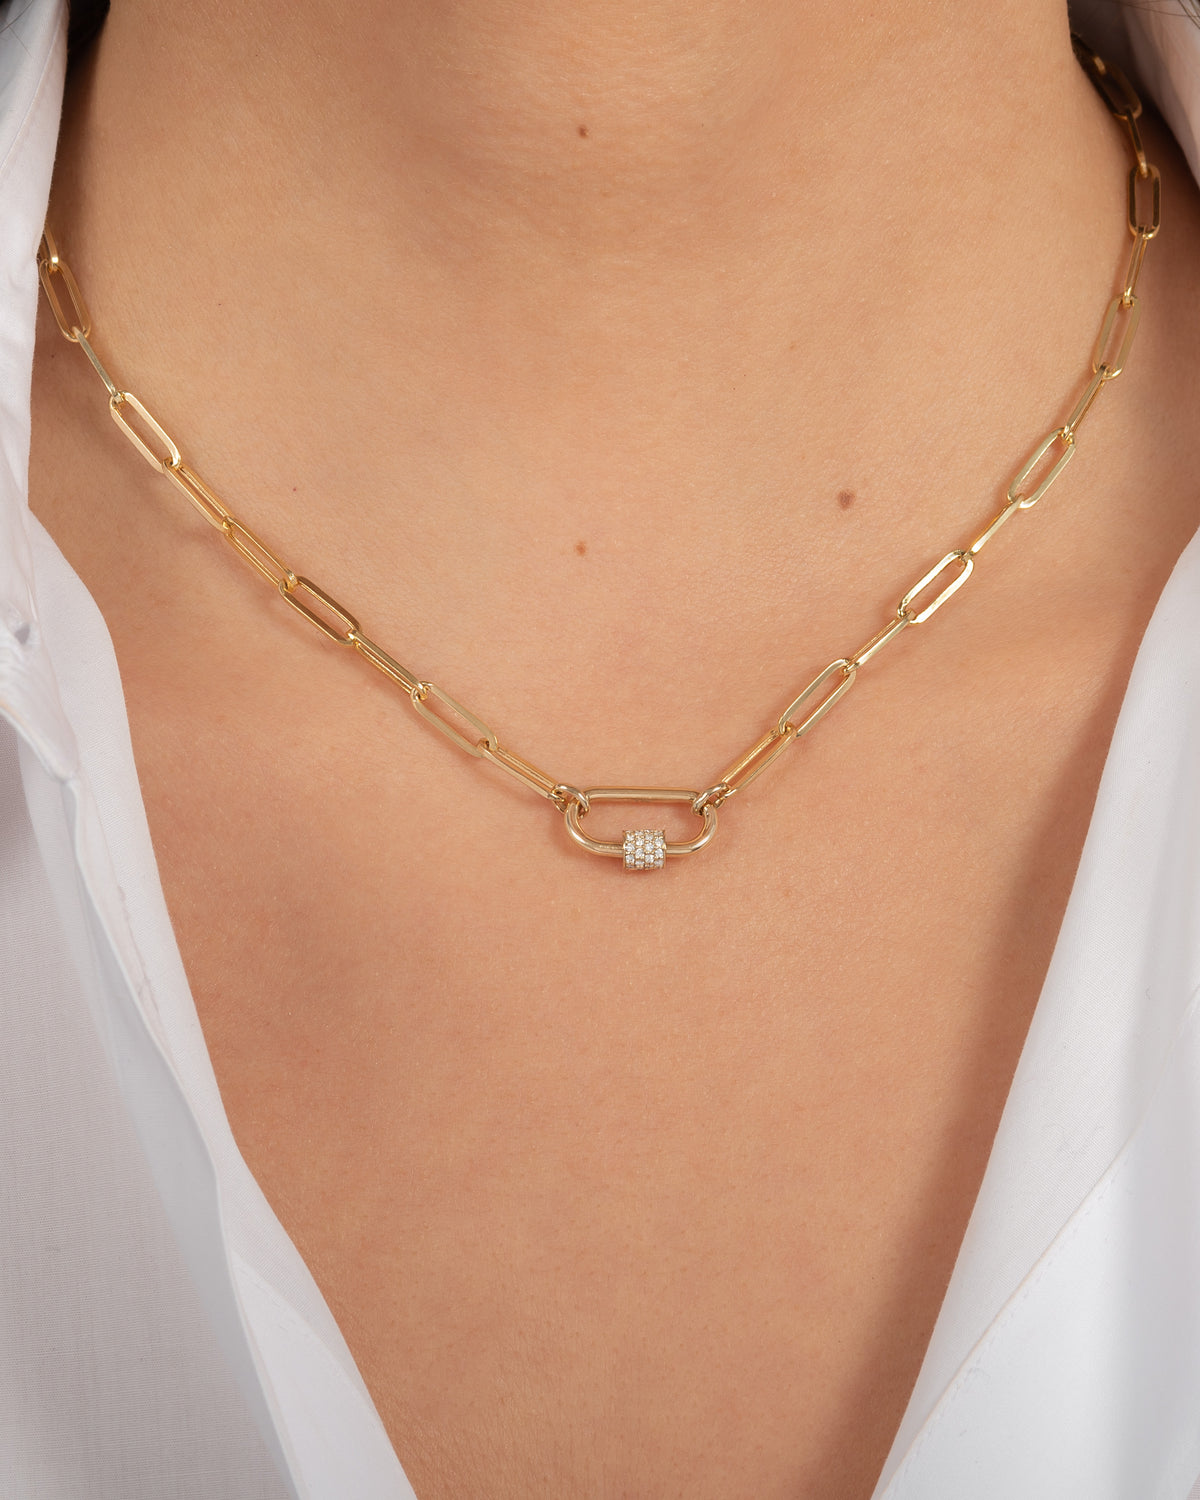 14k Gold Large Paper Clip Chain with Diamond Carabiner Necklace